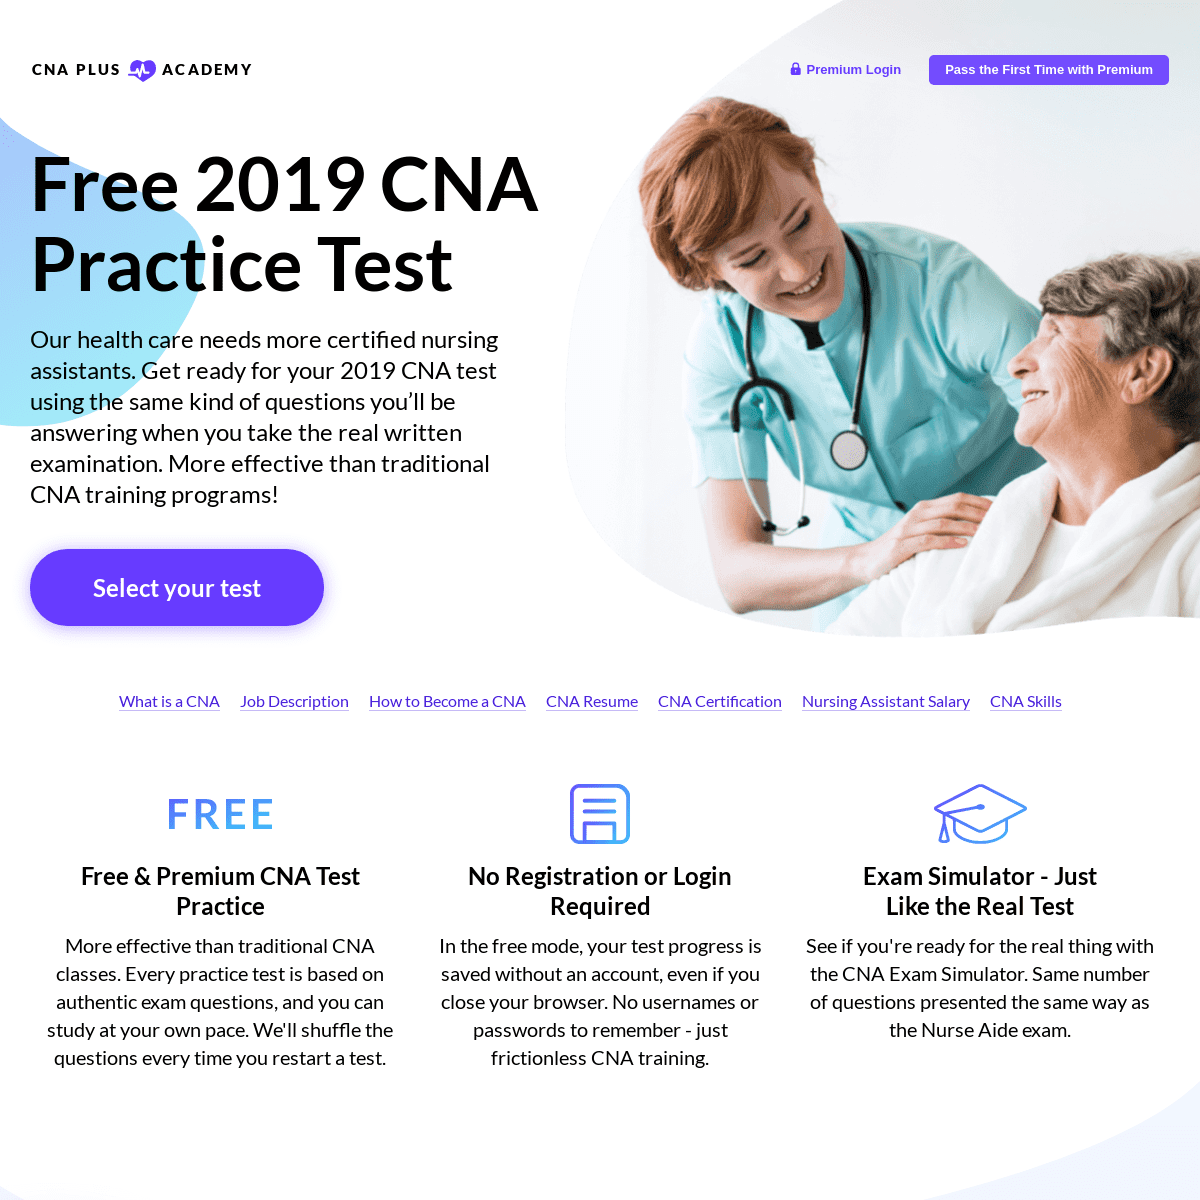 A complete backup of cna.plus